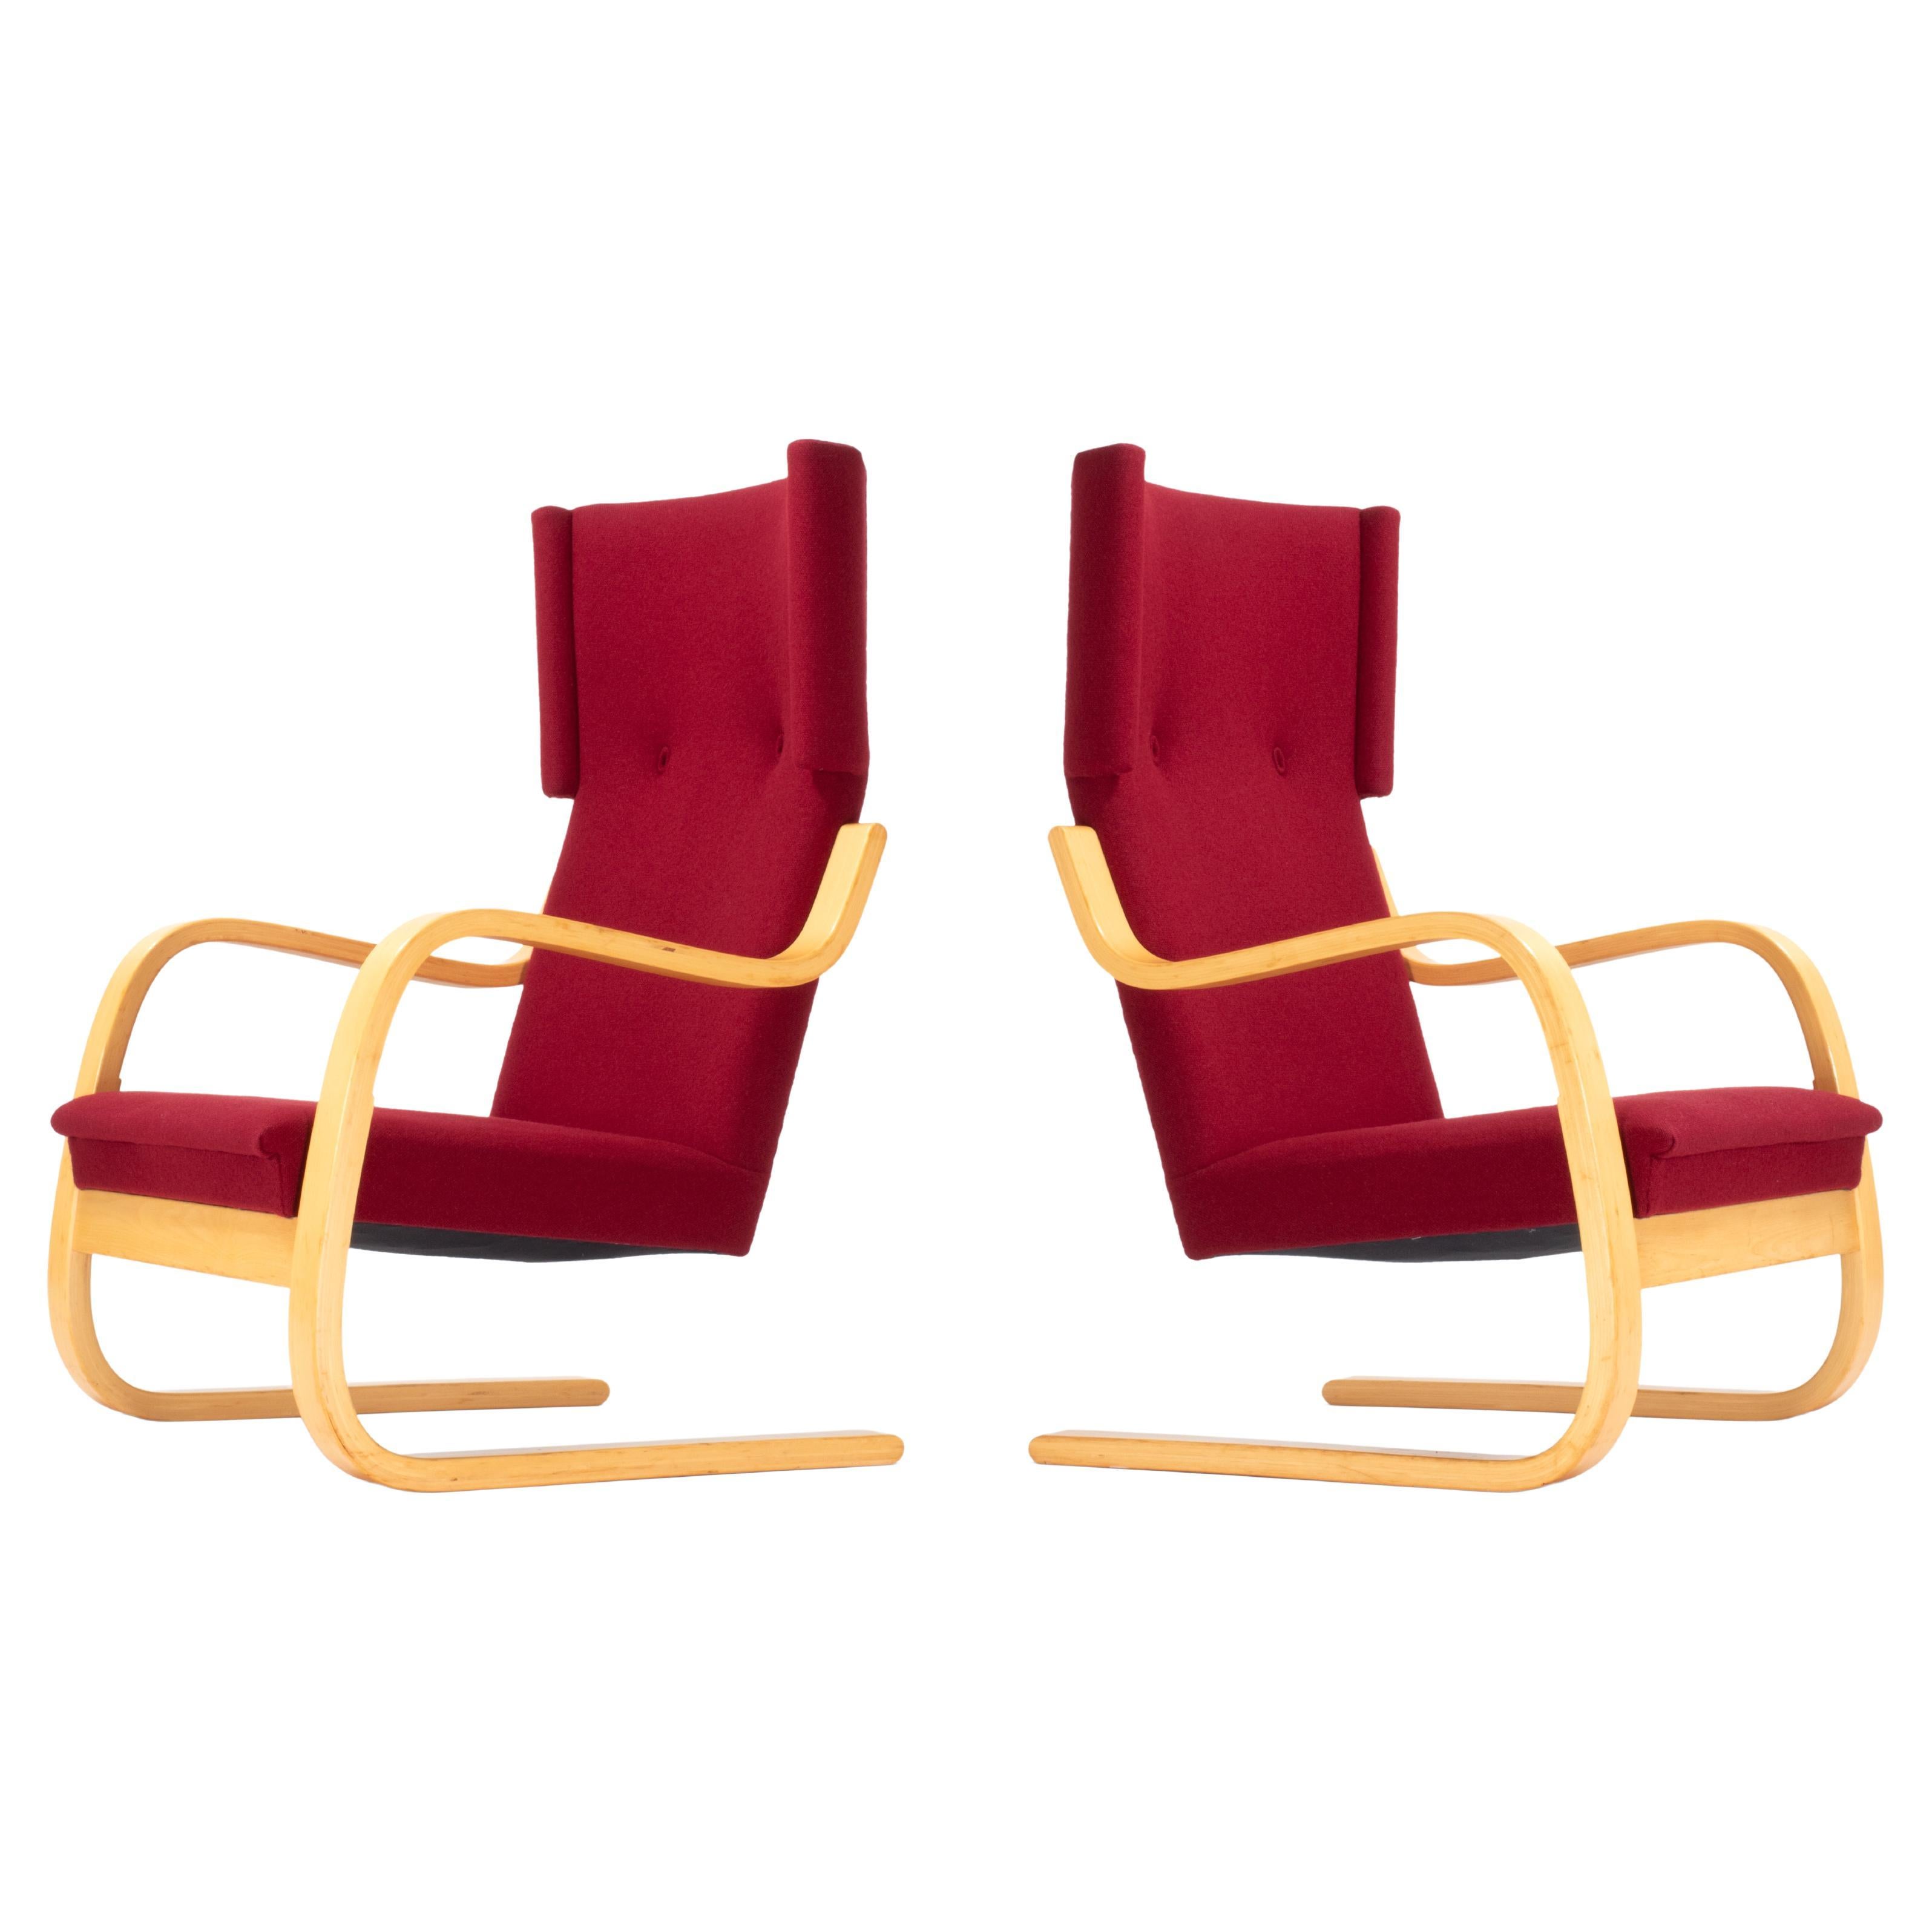 Vintage Mid-Century Model 36/401 Cantilever Lounge Chairs by Alvar Aalto, a Pair